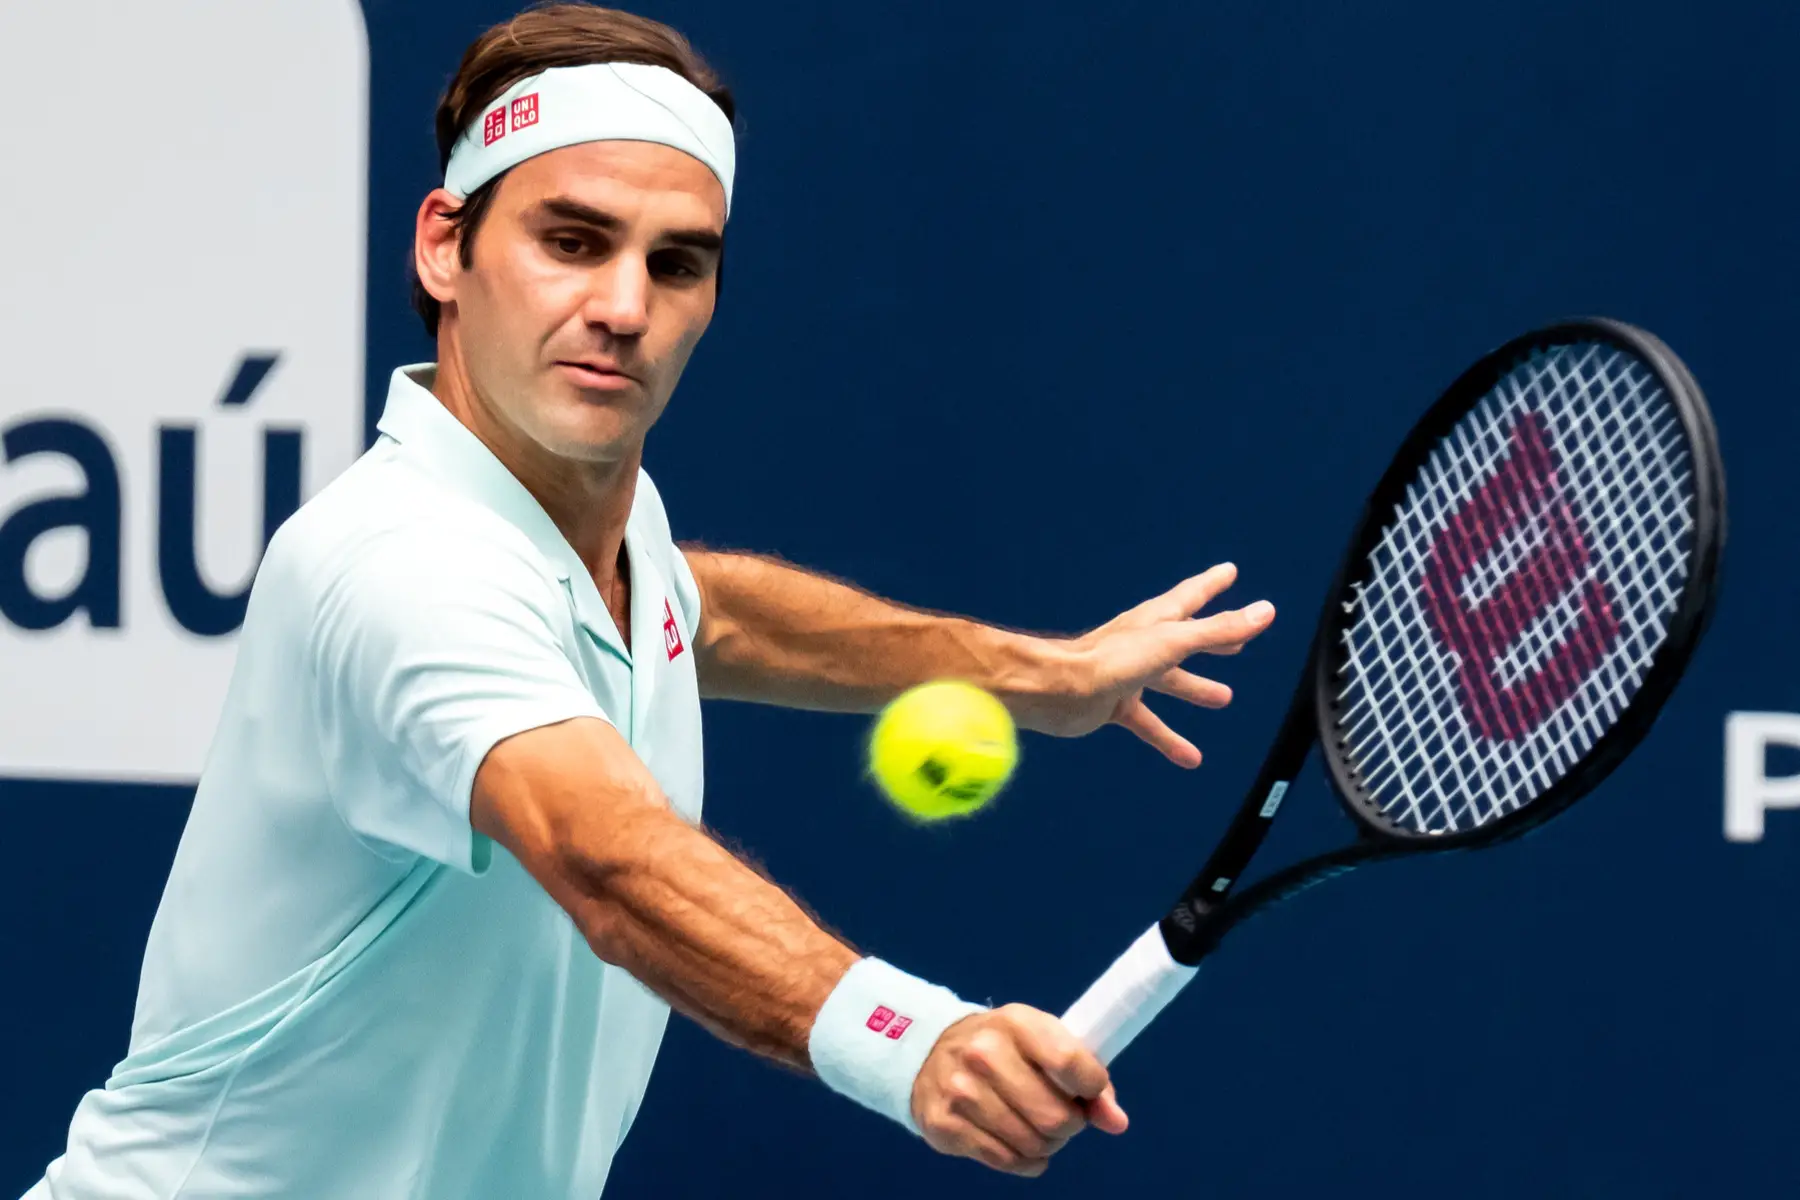 Roger Federer at the Miami Open